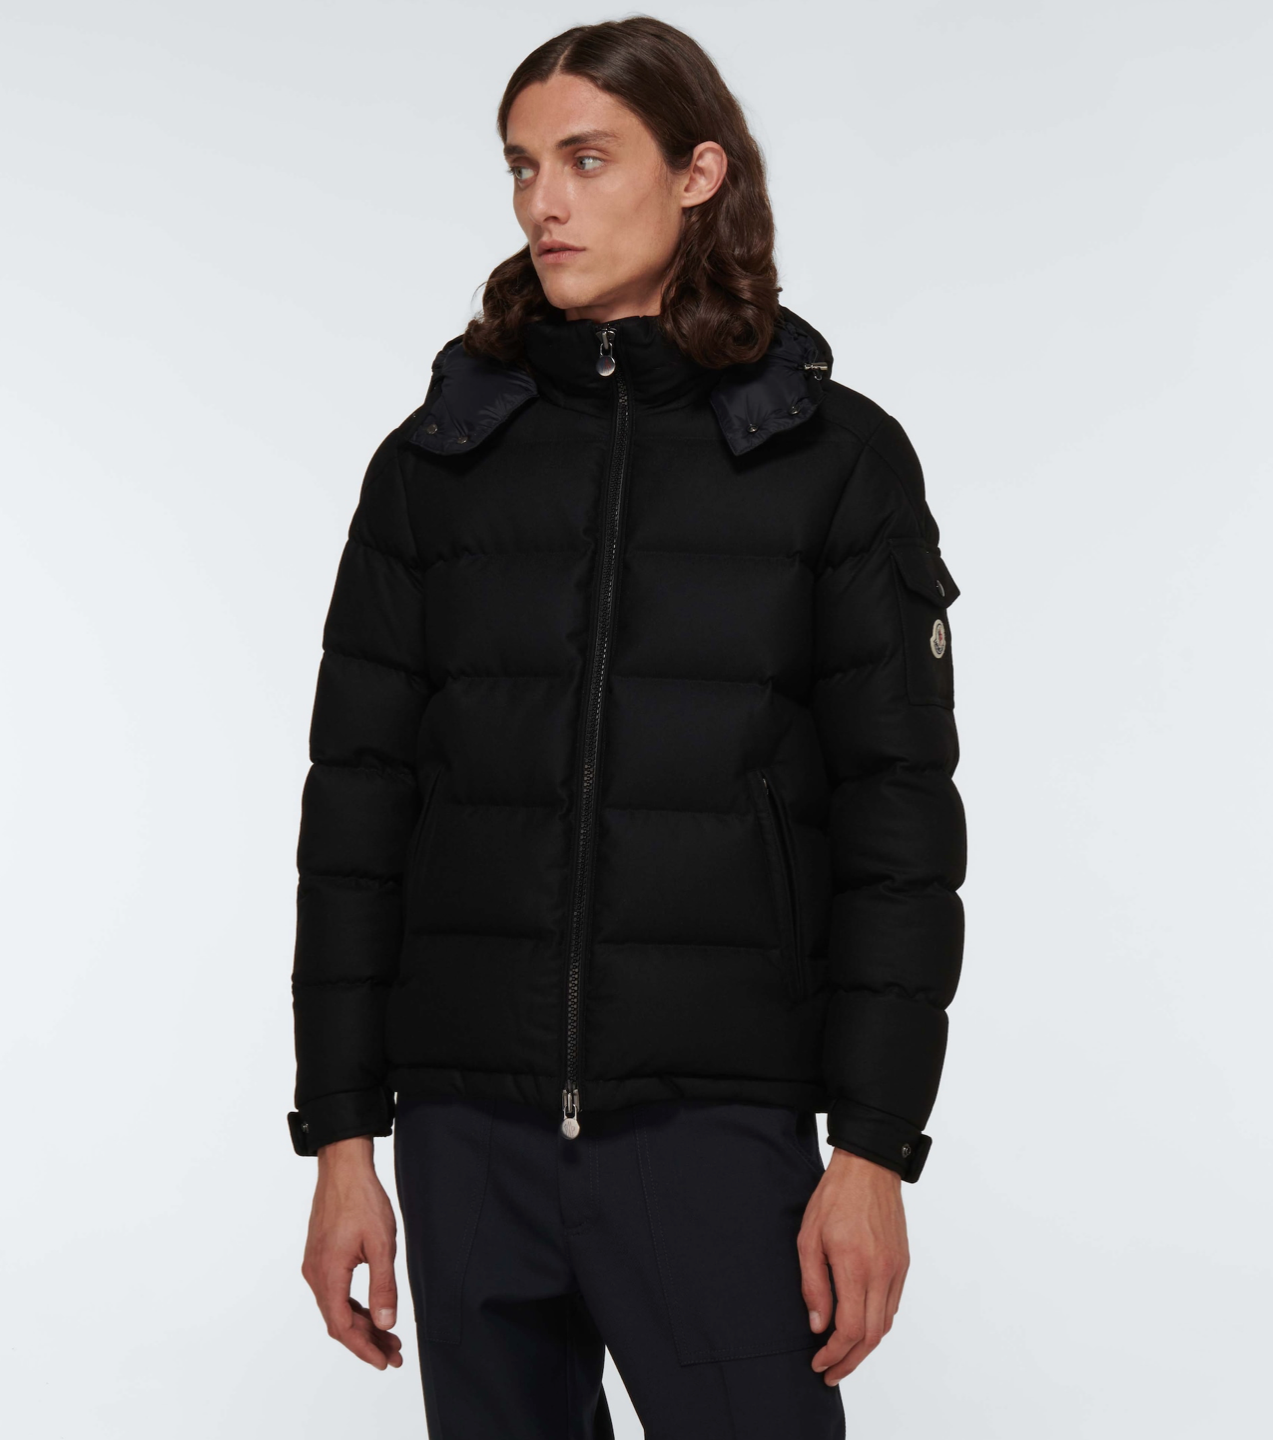 Our 3 Step Guide To Buying Your First Moncler Coat – Focused Fashion